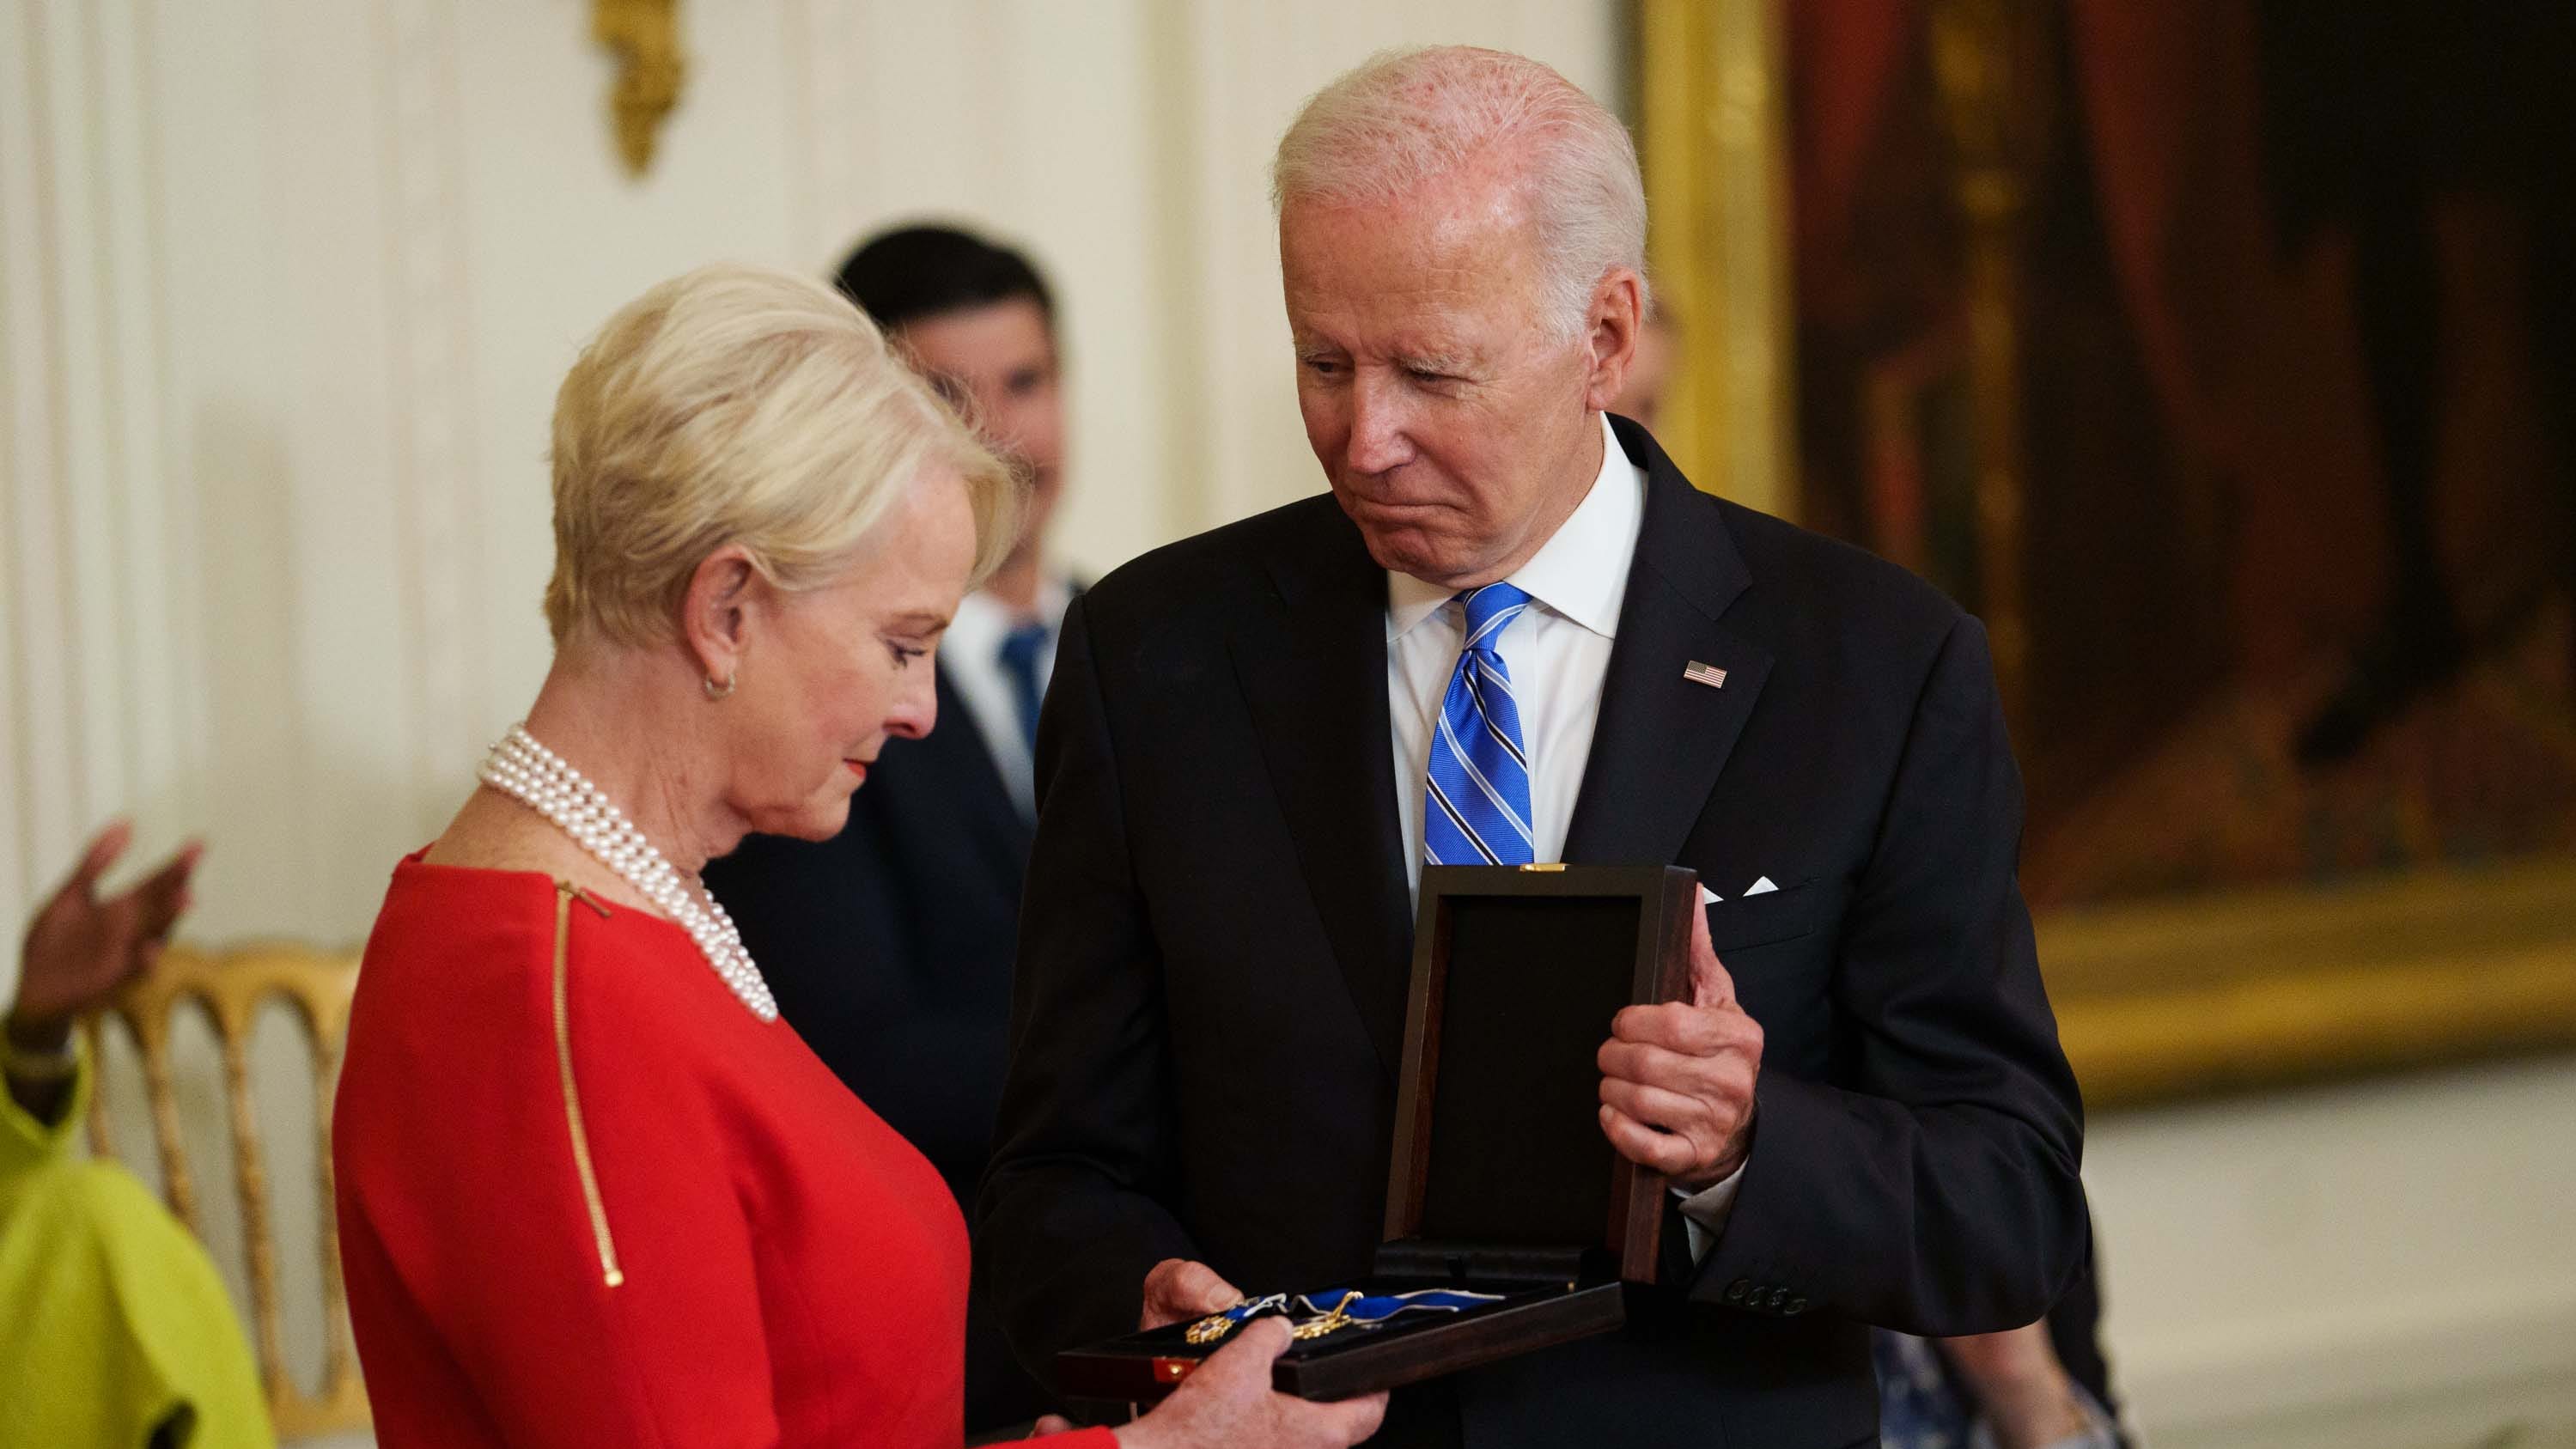 Cindy McCain, with tears in her eyes, remembers husband John McCain as she fights hunger in new role